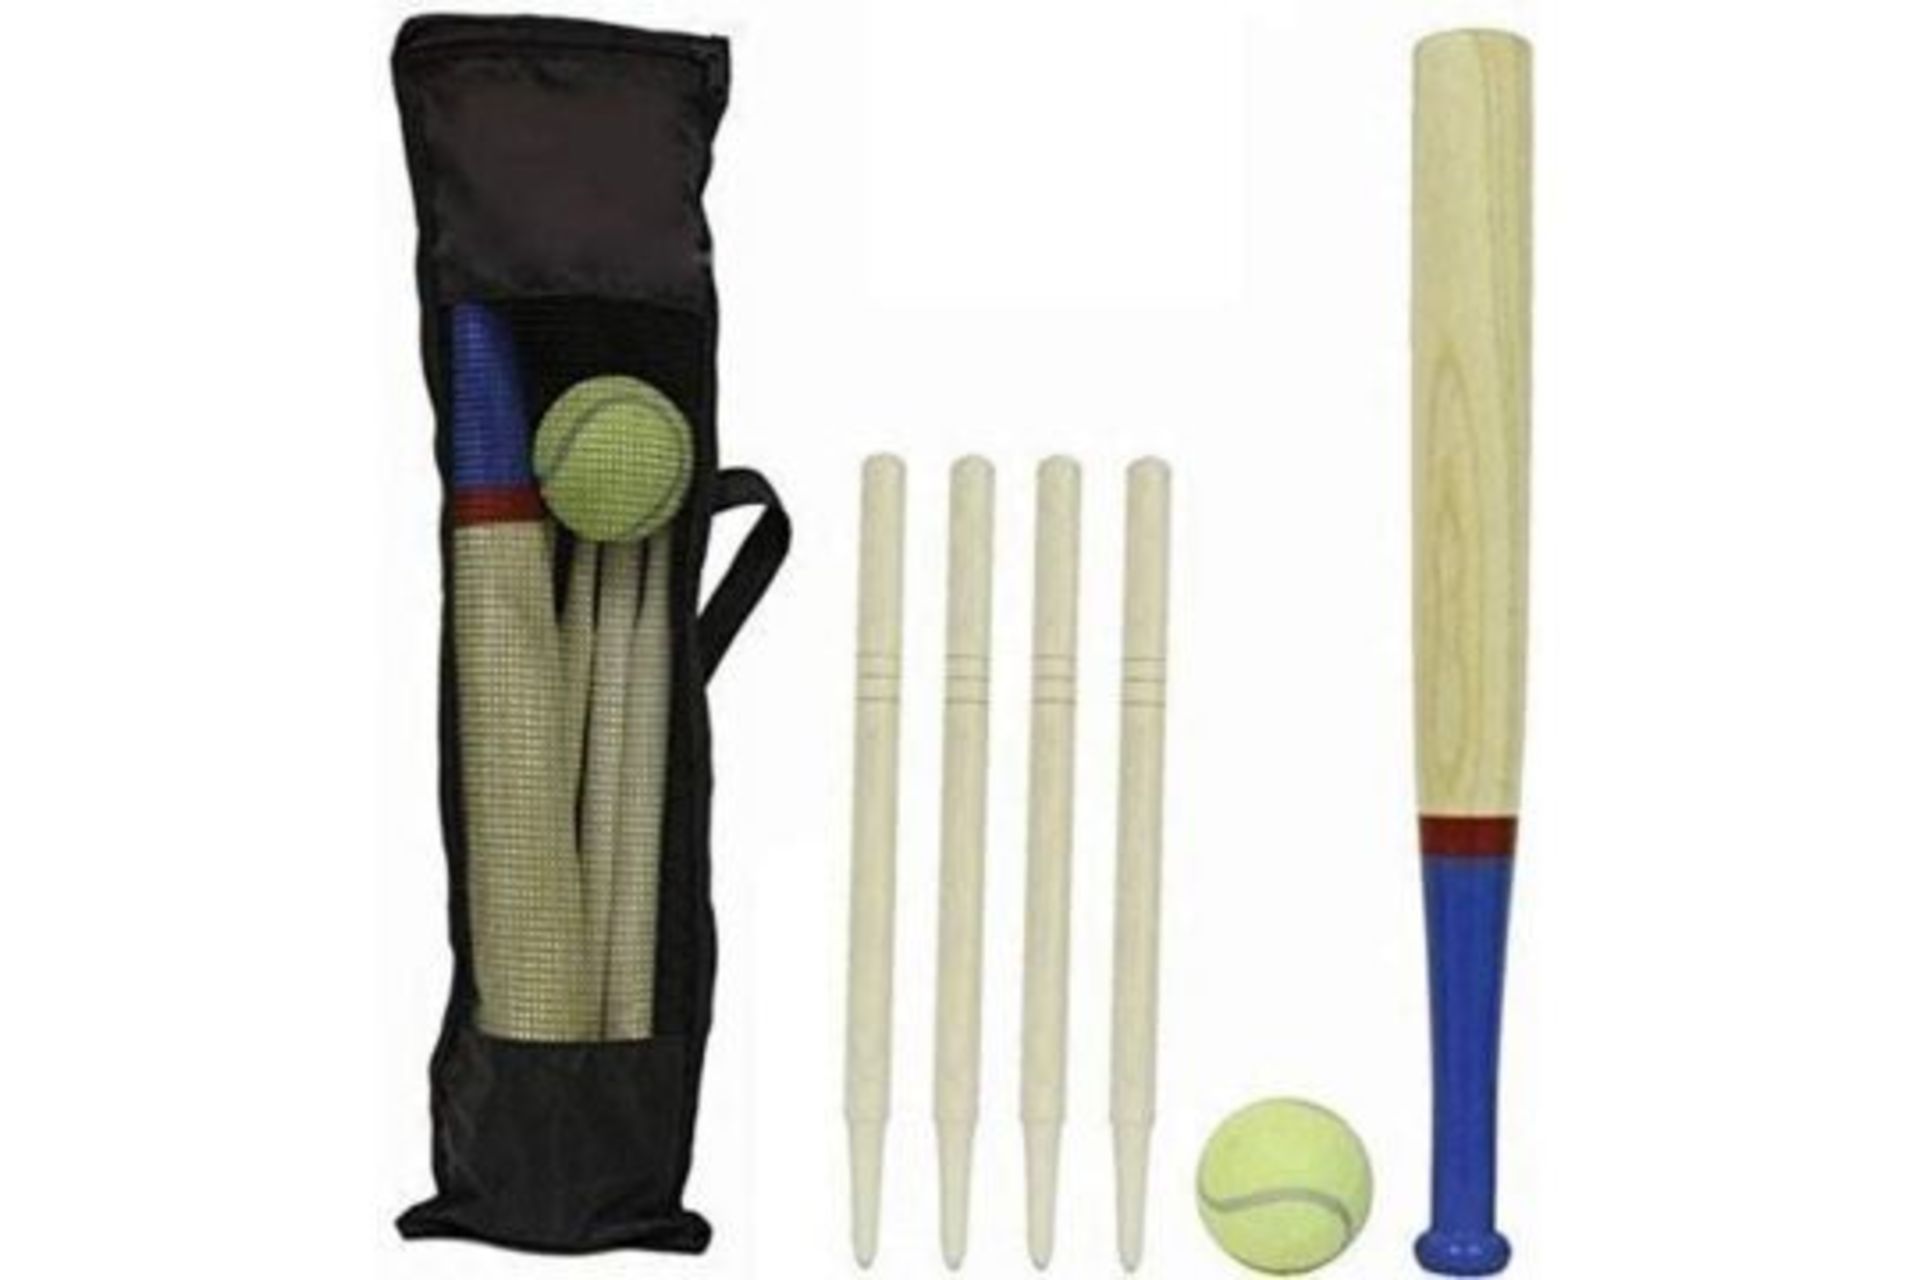 24 x NEW & PACKAGED SETS OF DIVCHI 6 Piece Wooden Rounders Set & Carry Bag - Baseball Bat & Soft